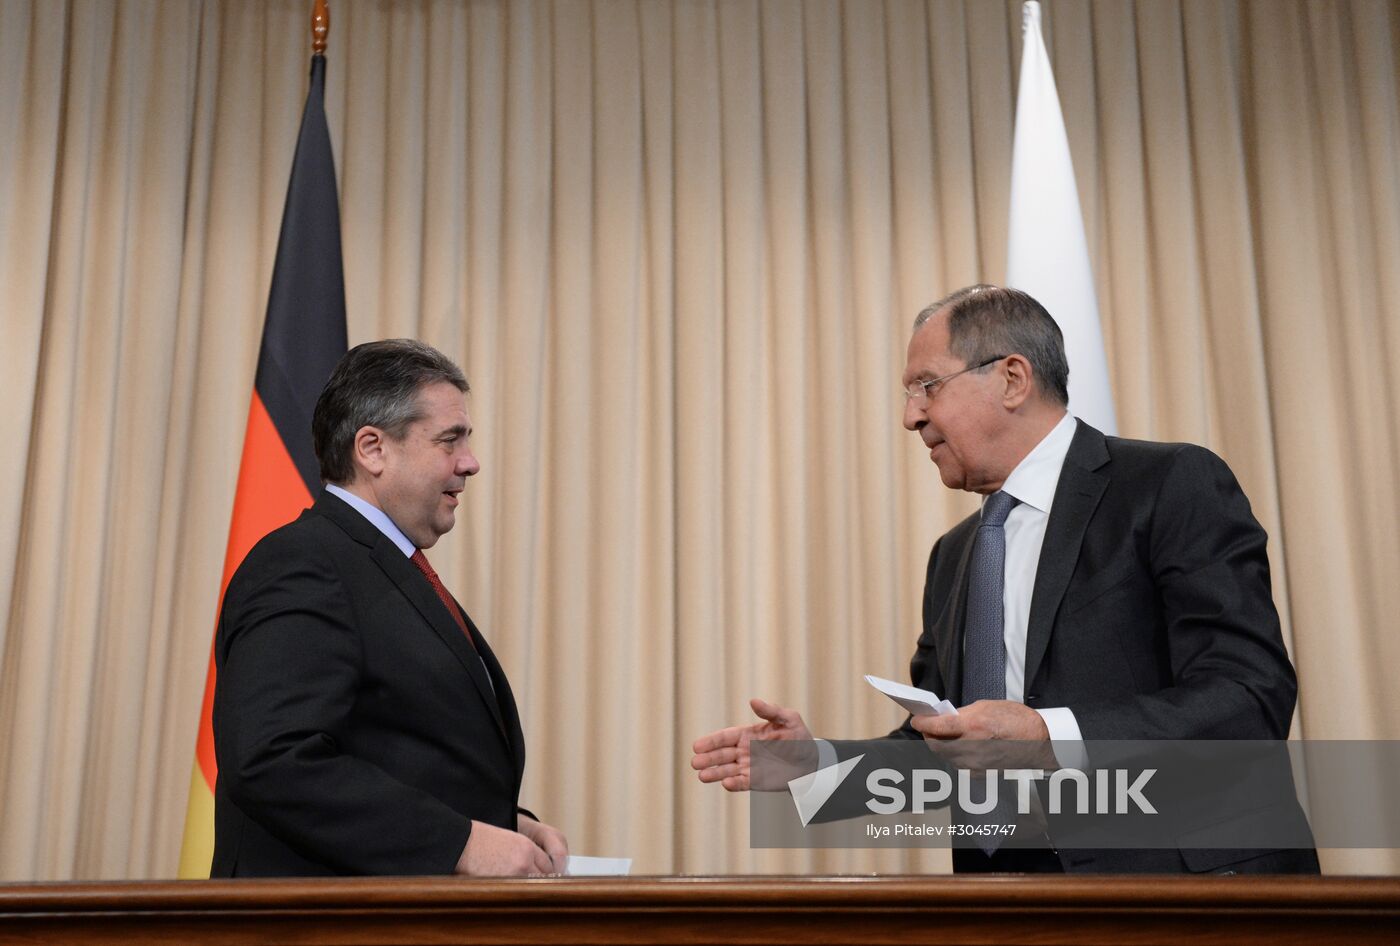 Meeting of Russian and German foreign ministers Sergei Lavrov and Sigmar Gabriel